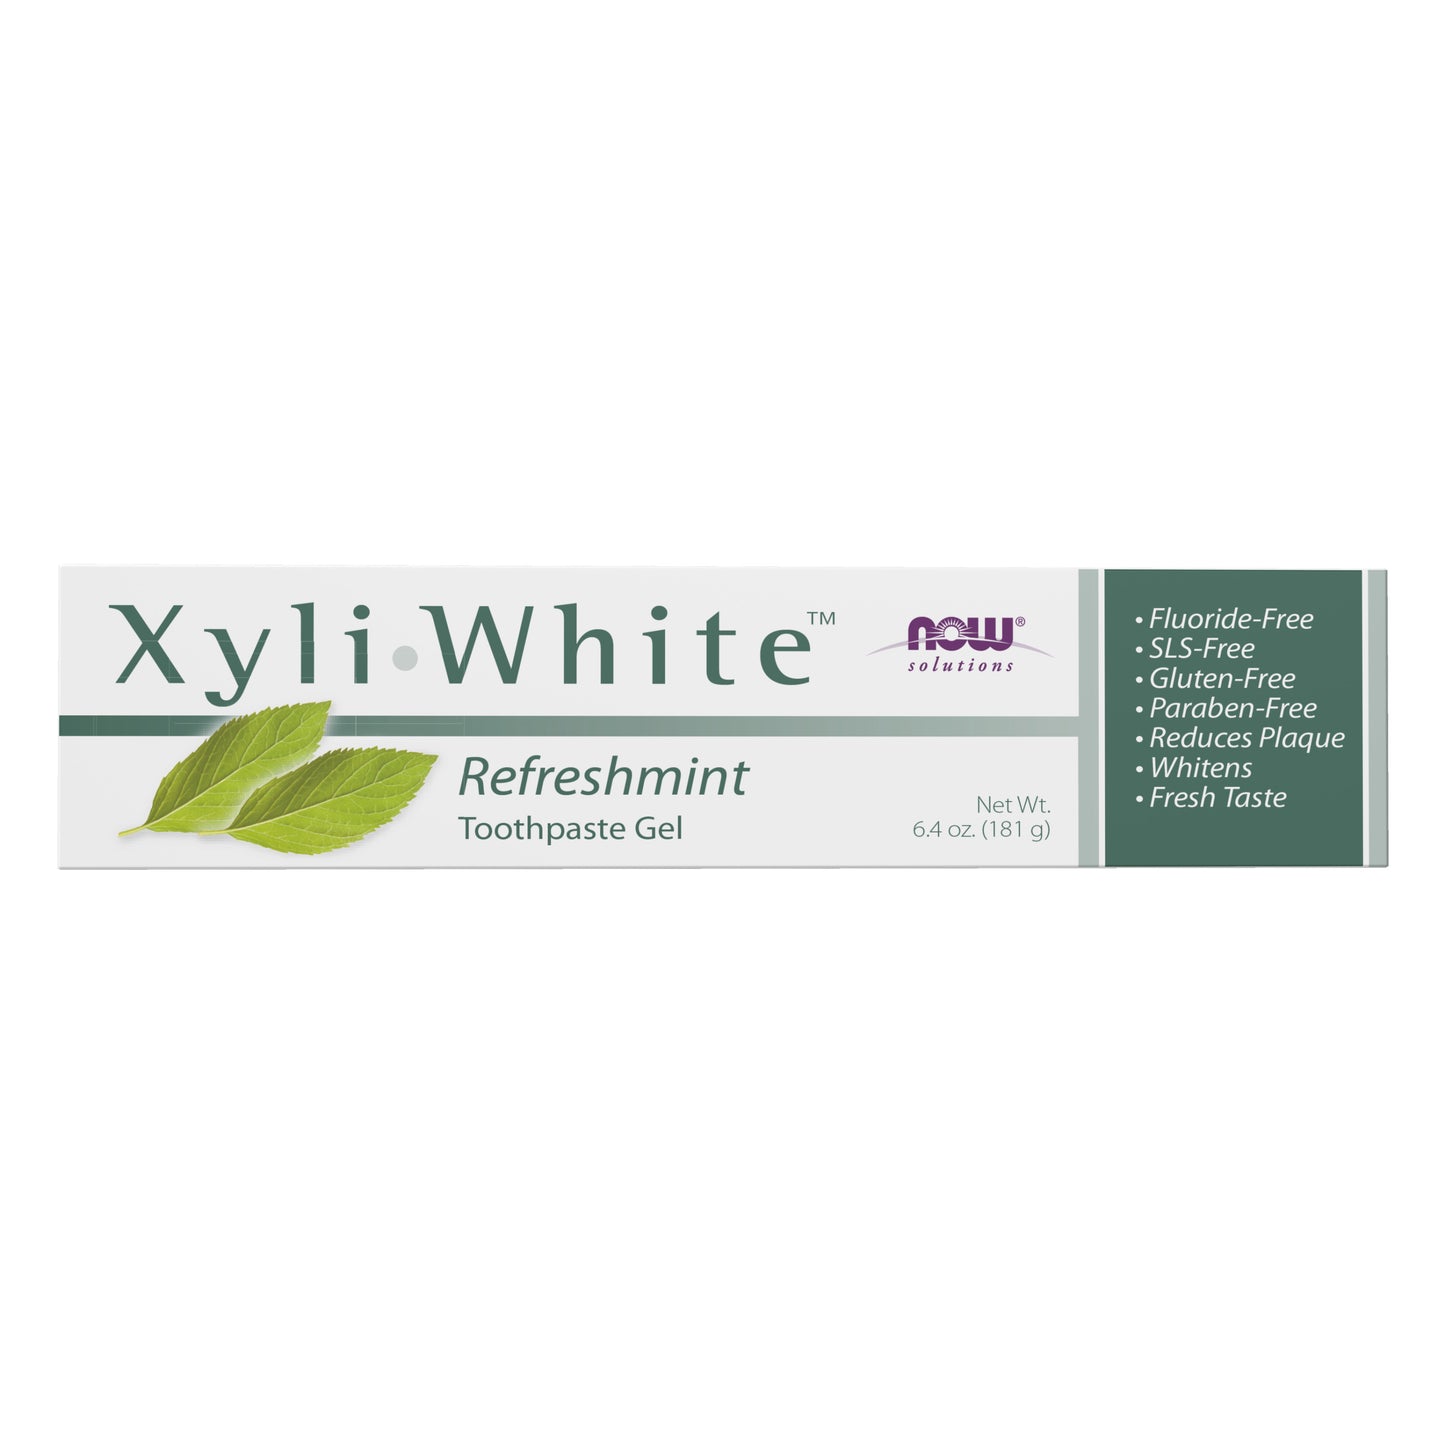 Xyliwhite™ Refreshmint Toothpaste Gel